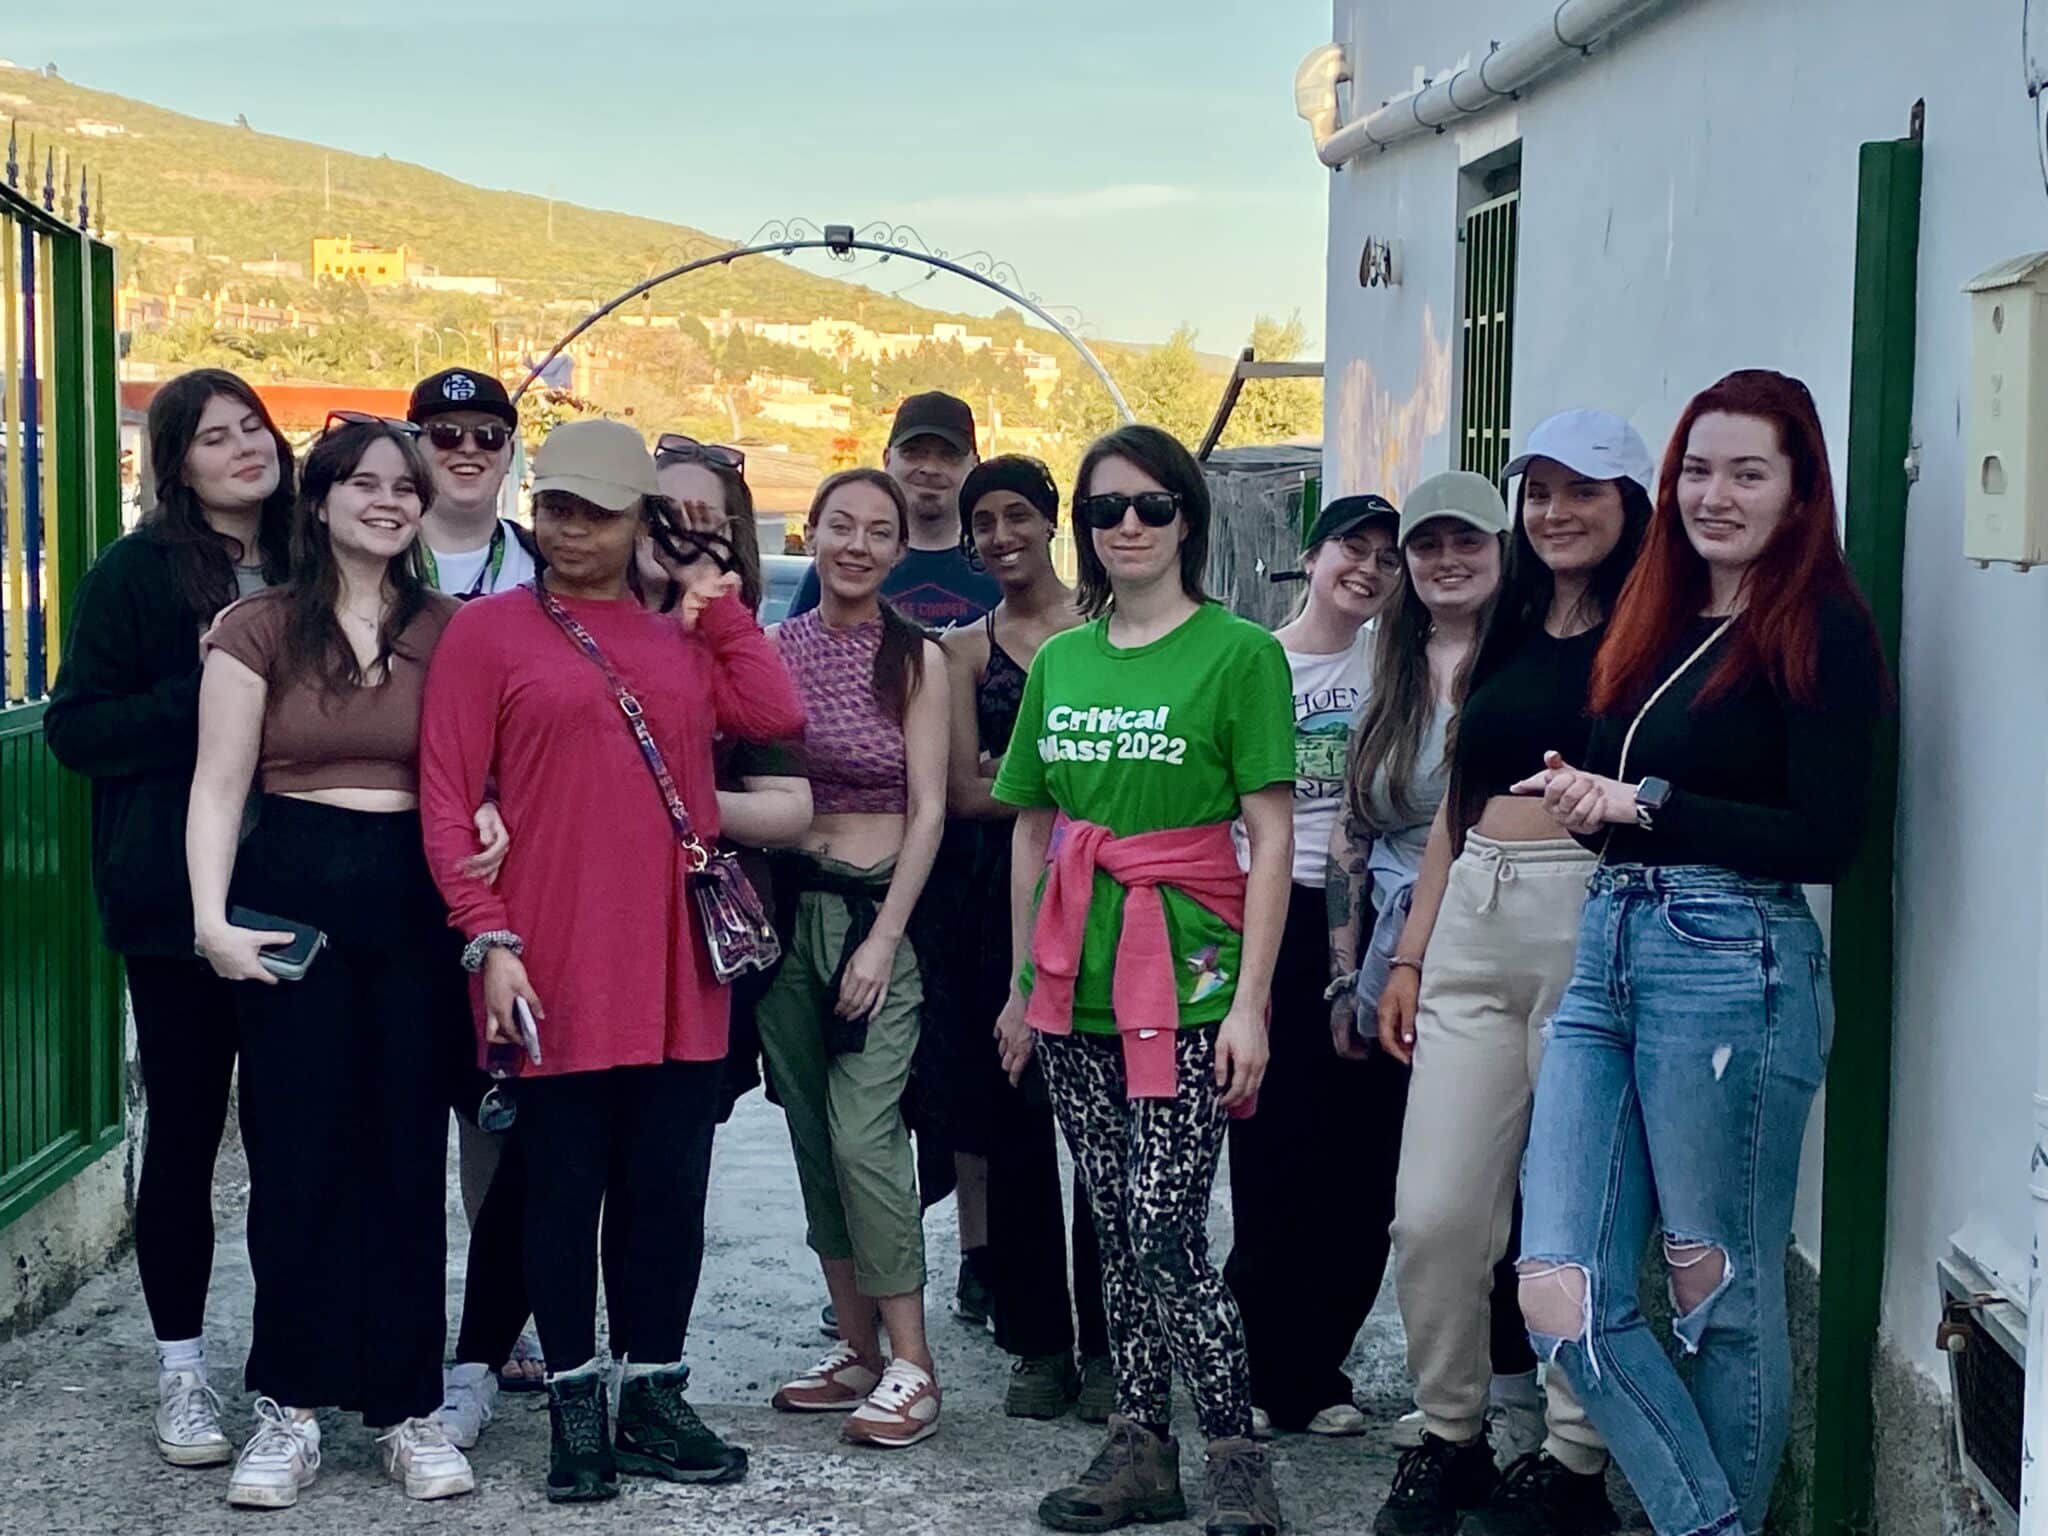 Animal Welfare students take conservation trip to Tenerife